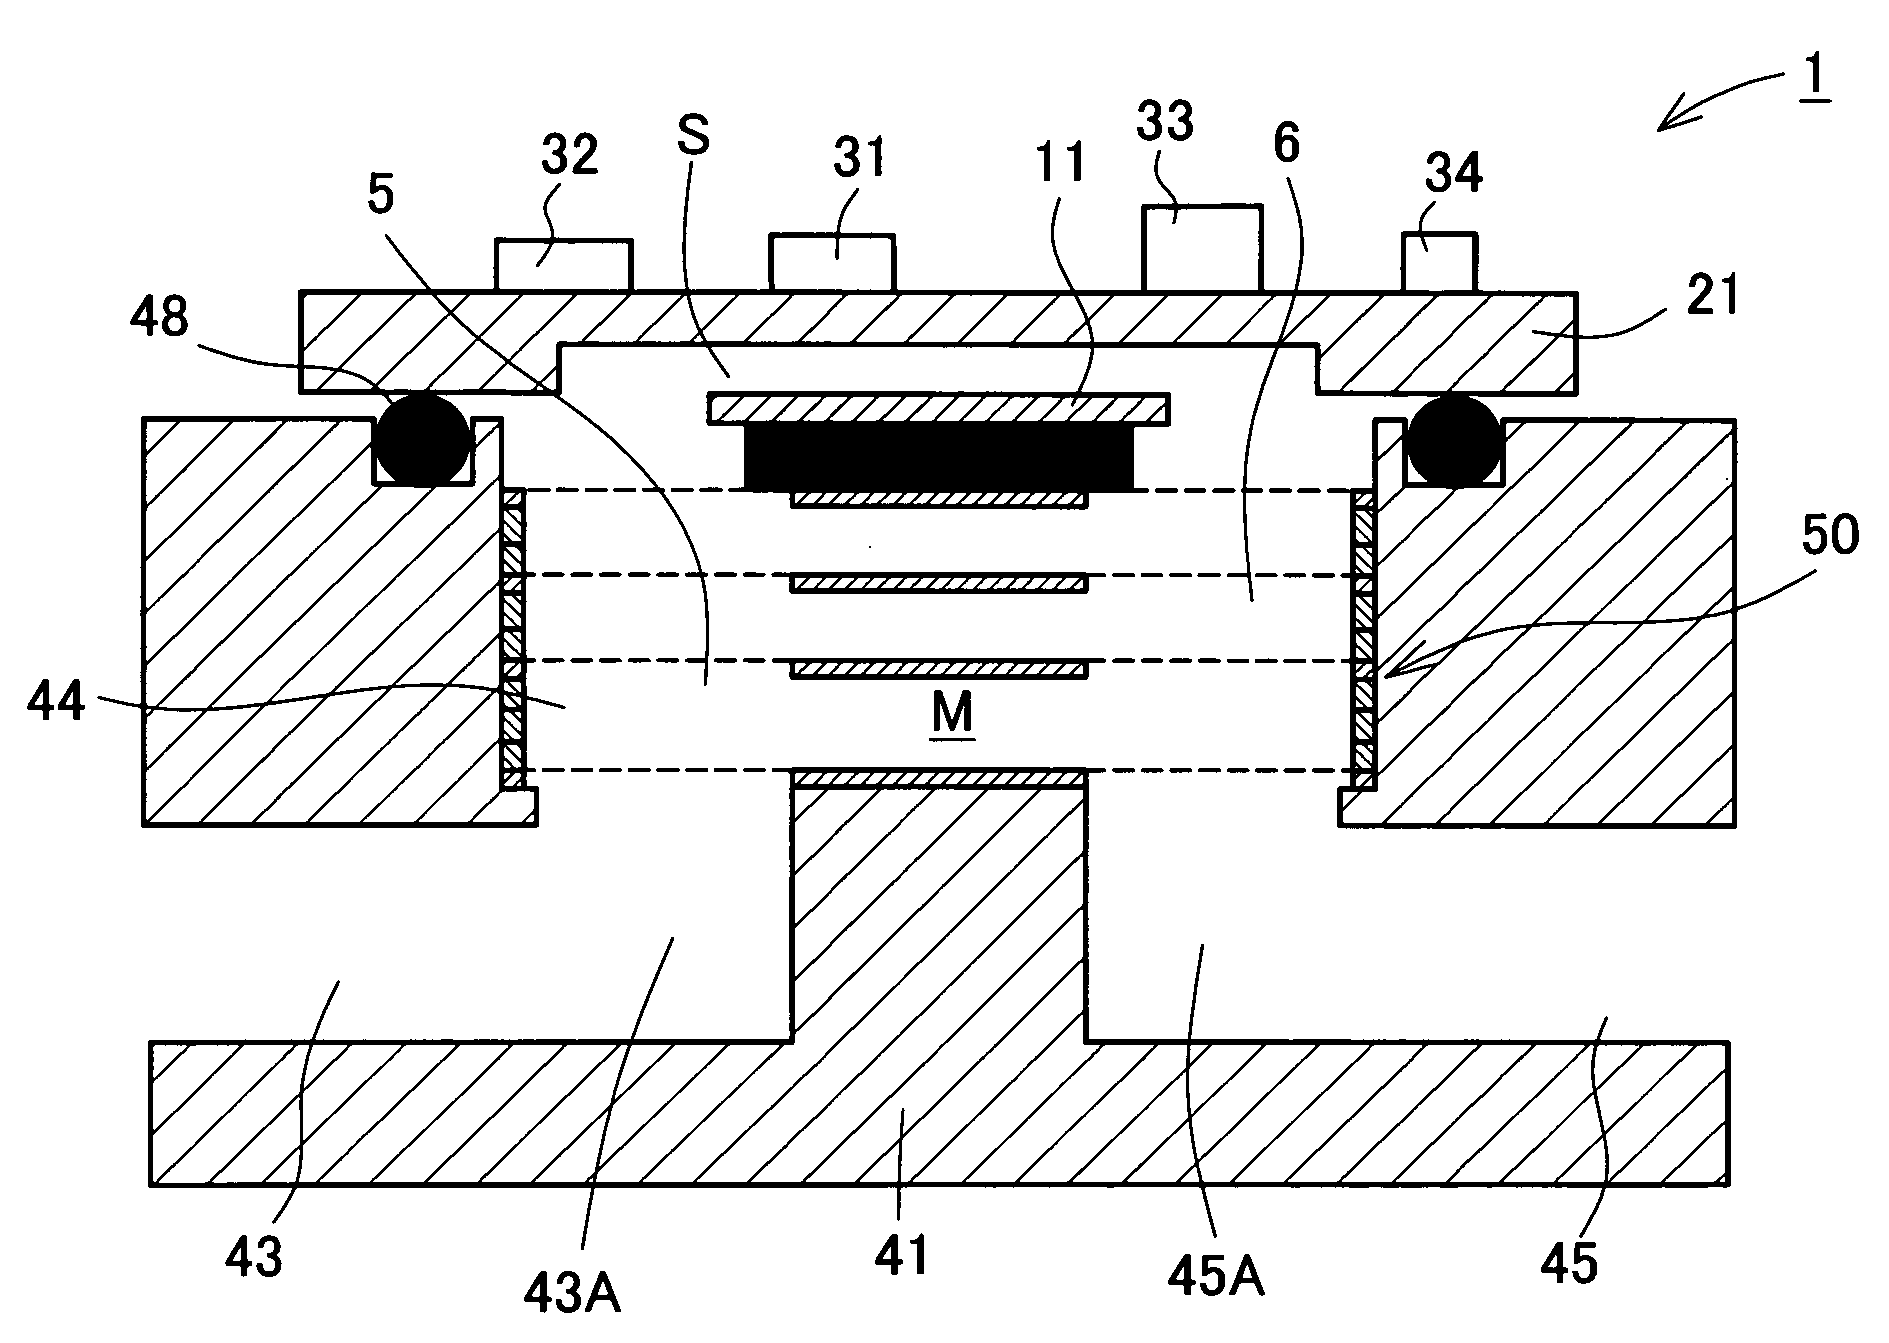 Thermal flowmeter having a laminate structure